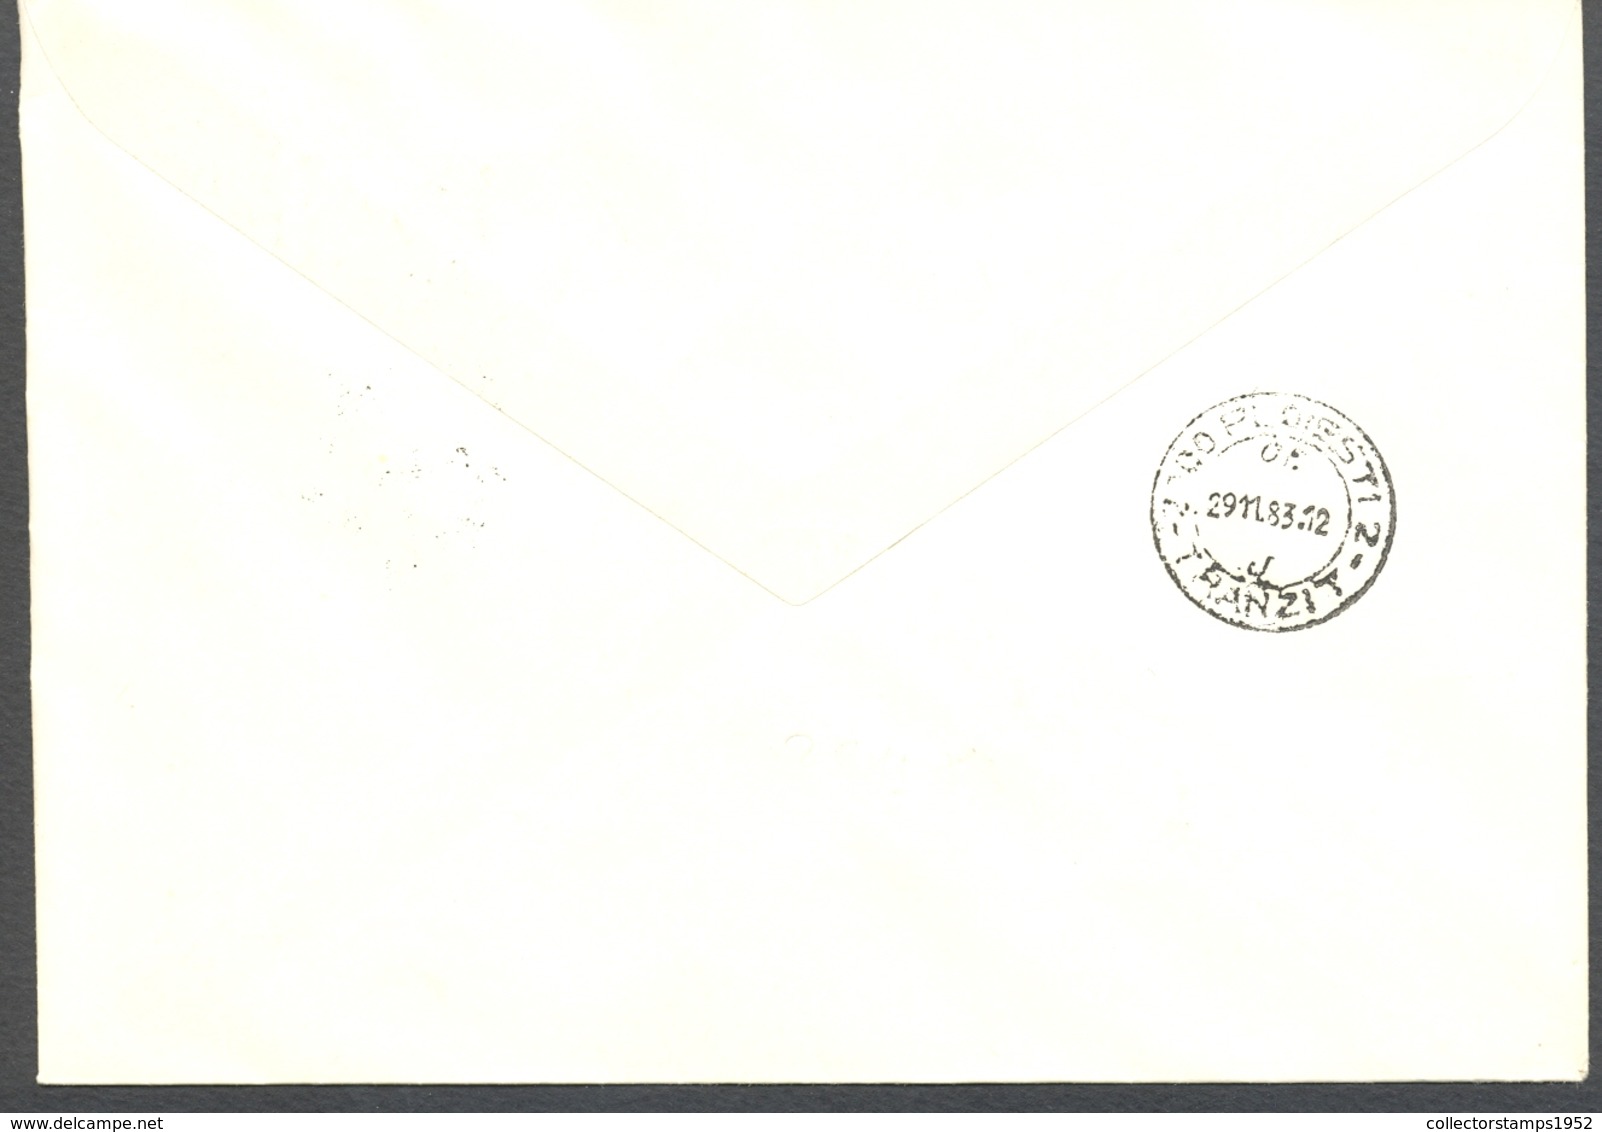 75077- ROMANIAN PHILATELISTS ASSOCIATION STAMP AND SPECIAL POSTMARK ON COVER, 1983, ROMANIA - Lettres & Documents